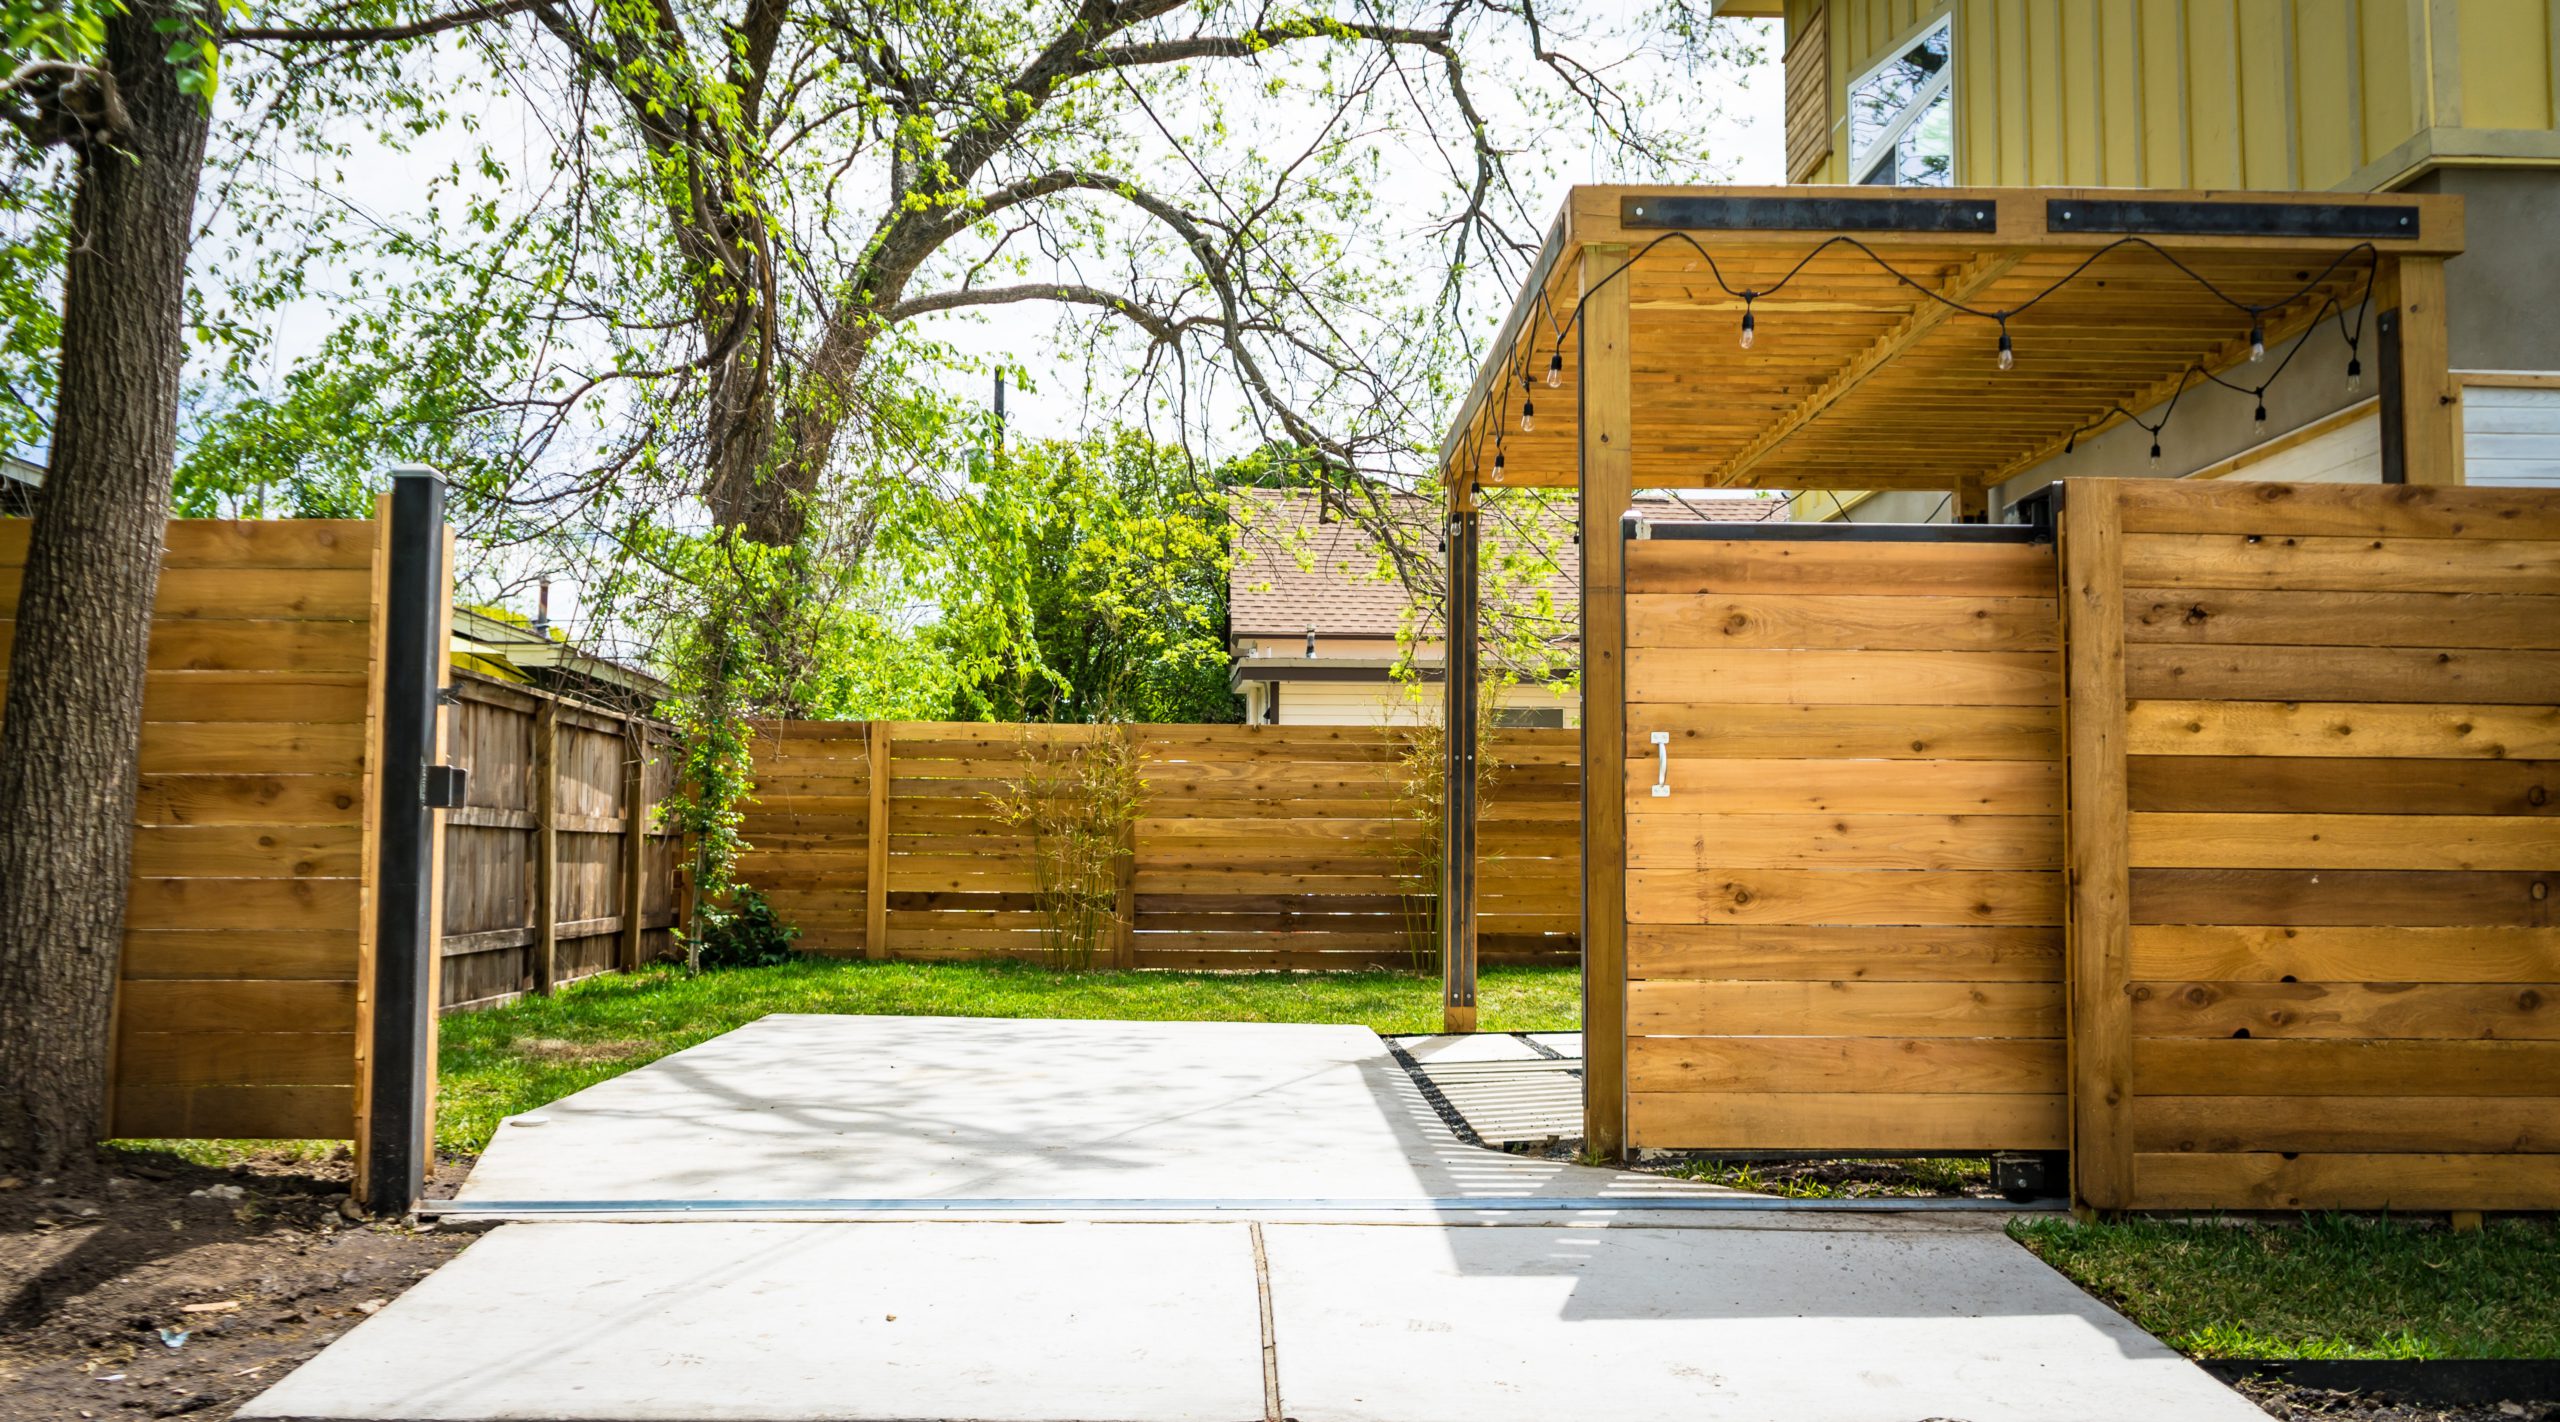 Backyard with wooden fences surrounding